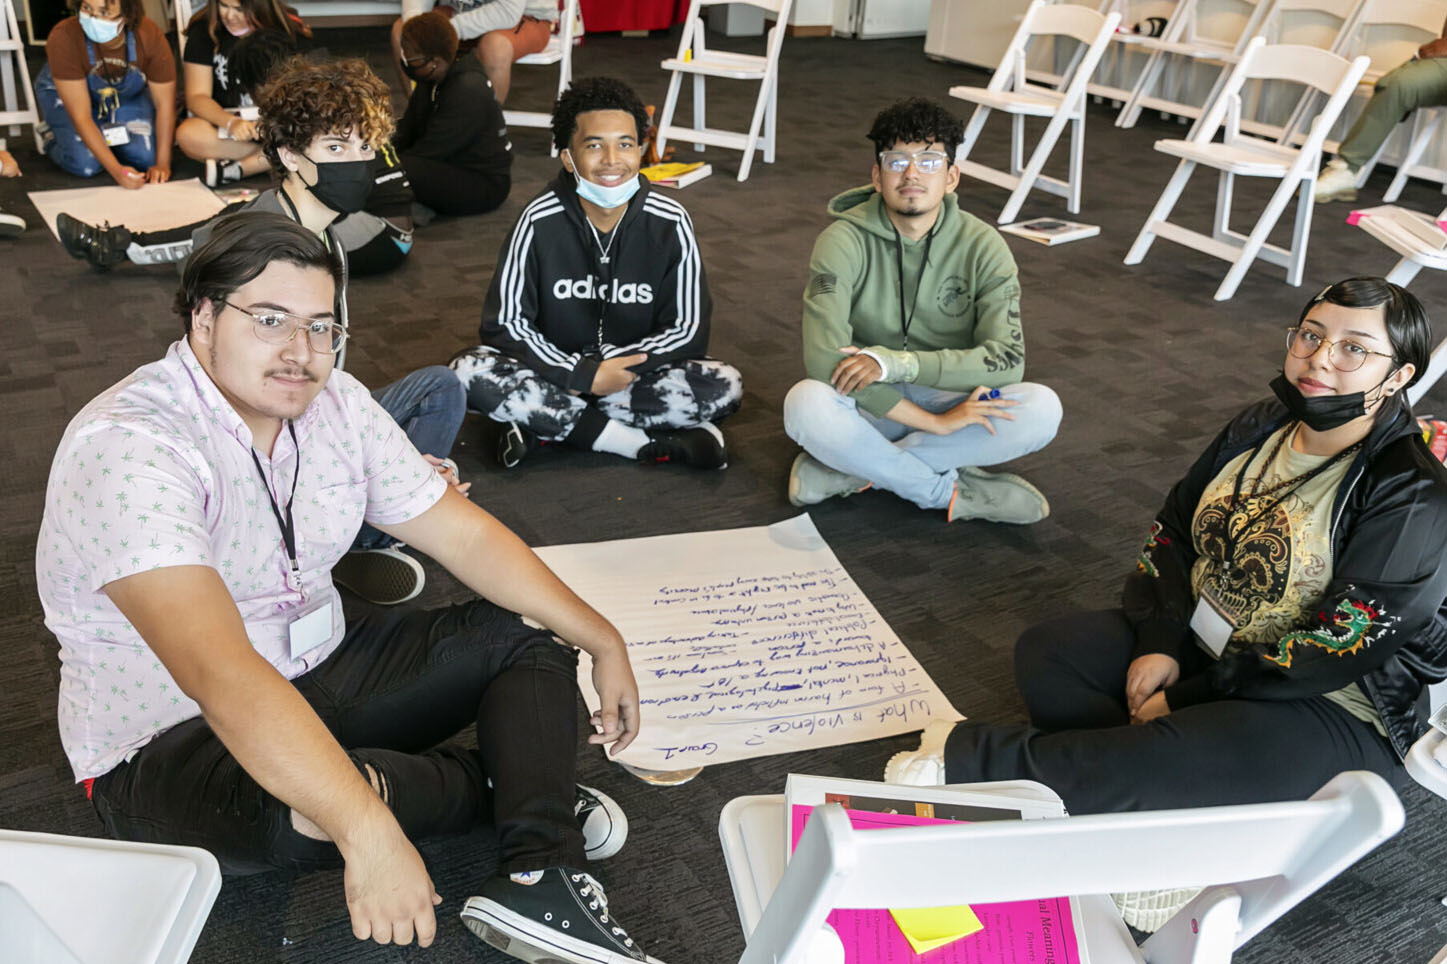 Four people sitting in a circle on the floor in front of a large poster board